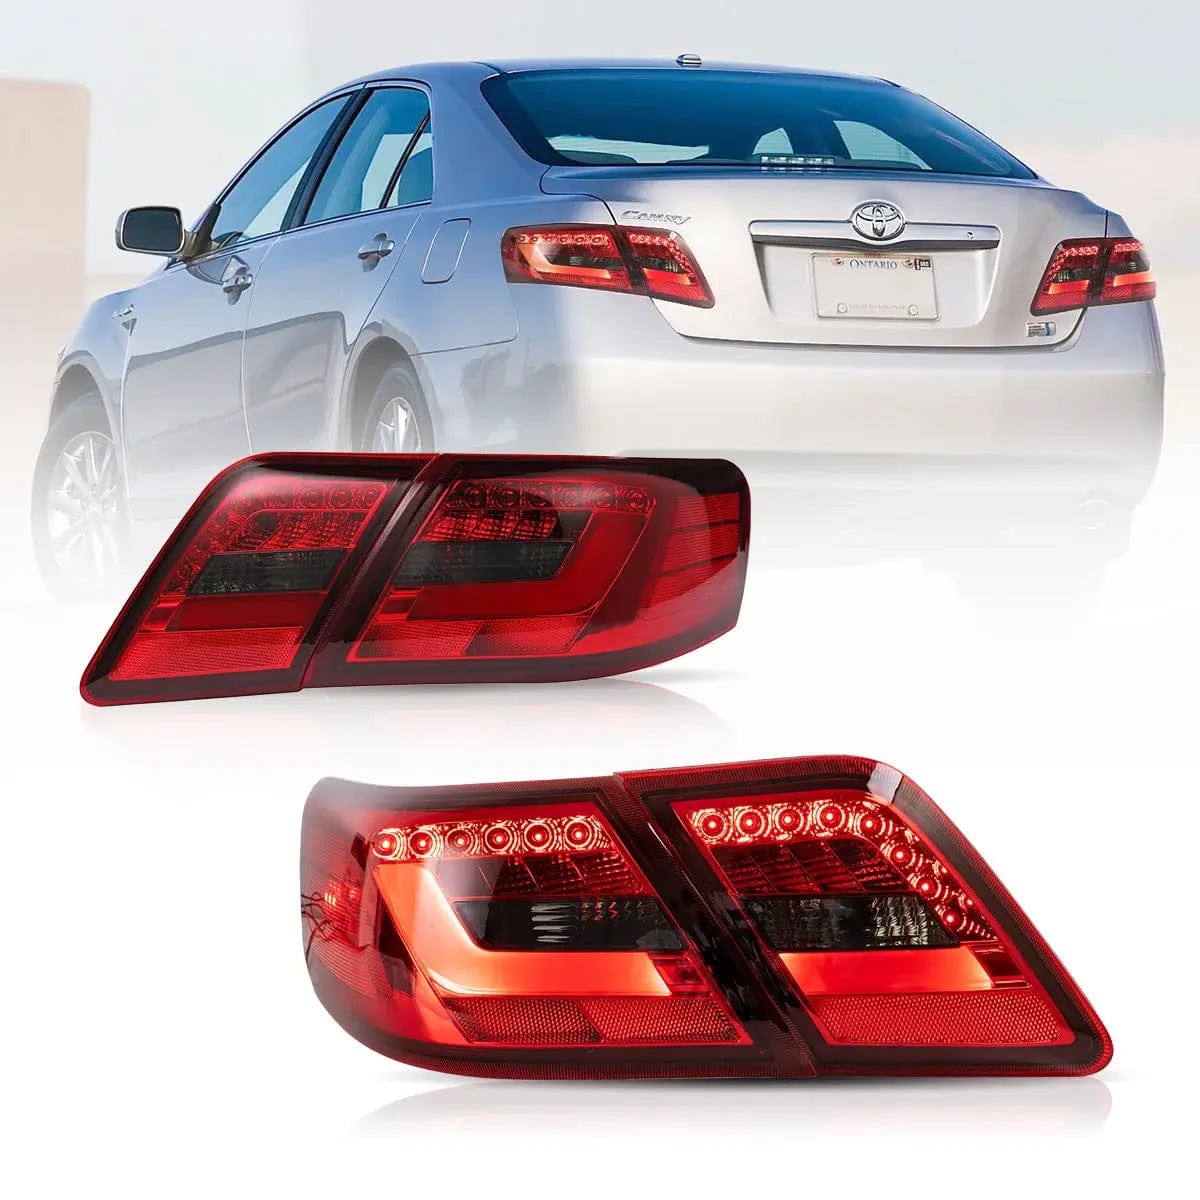 2006-2011 TOYOTA CAMRY Tail Lights - RGB Halo Kits Multicolor Flow Series Color Chasing RGBWA LED headlight kit Colorshift Oracle Lighting Trendz OneUpLighting Morimoto theretrofitsource AutoLEDTech Diode Dynamics